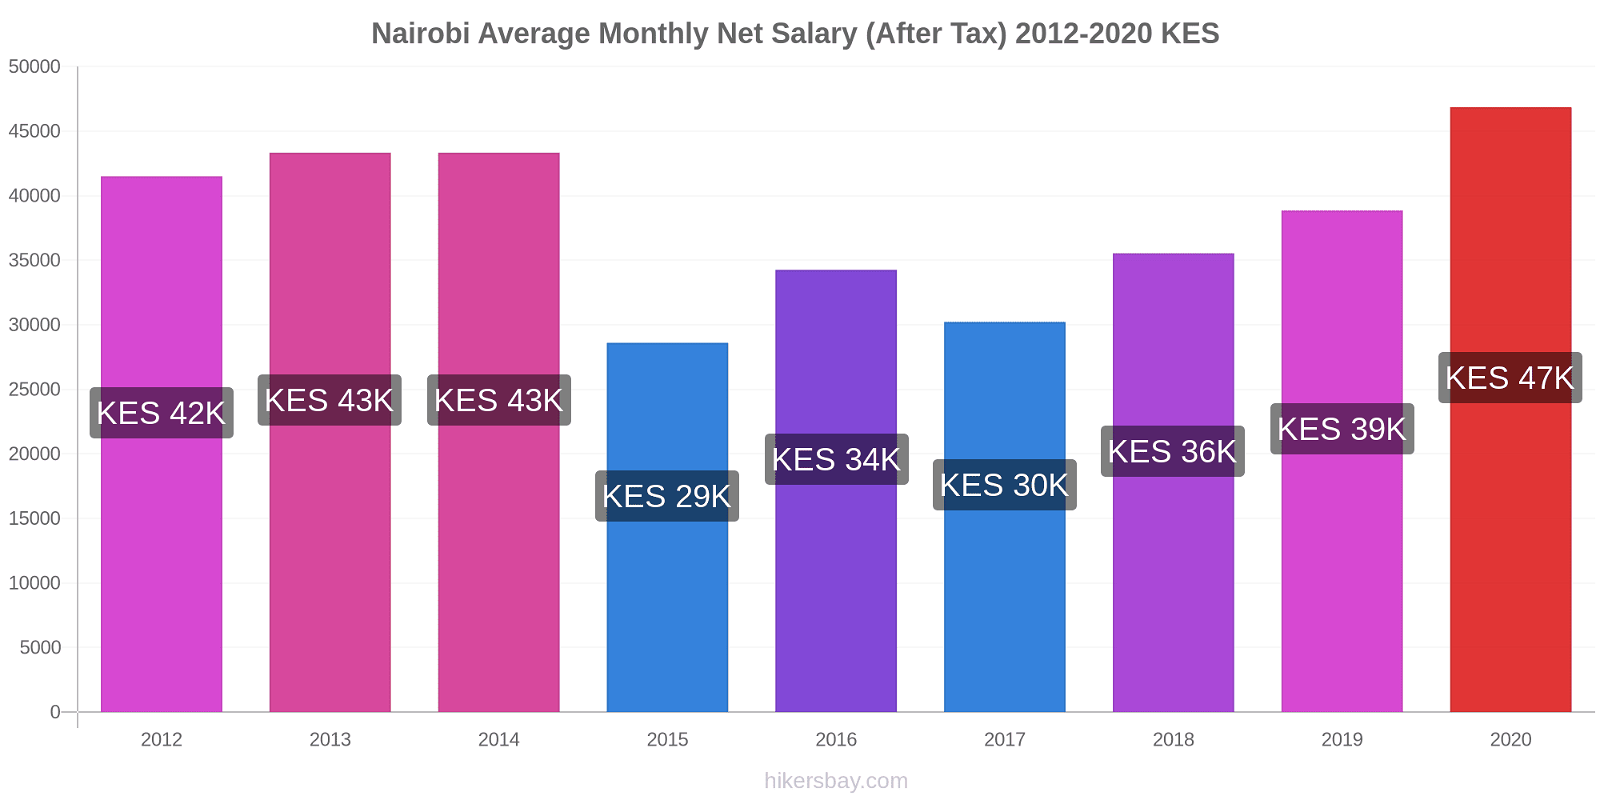 Nairobi price changes Average Monthly Net Salary (After Tax) hikersbay.com